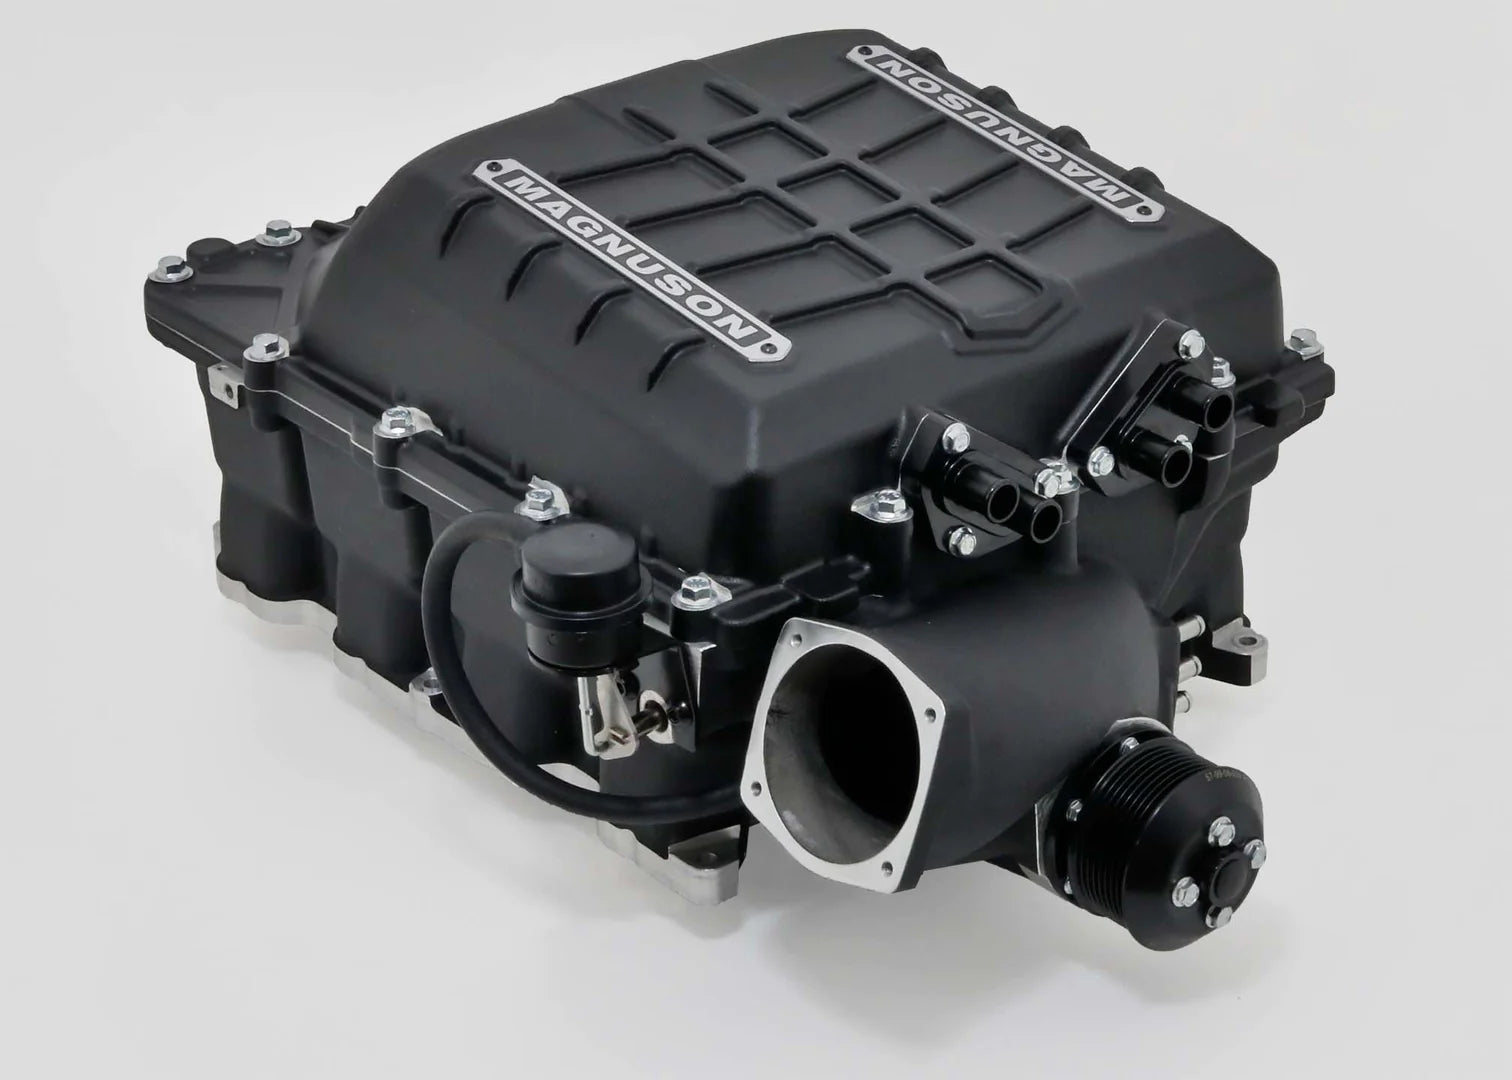 '10-18 Magnum Toyota Tundra (Flex Fuel) Supercharger System Magnuson Superchargers display